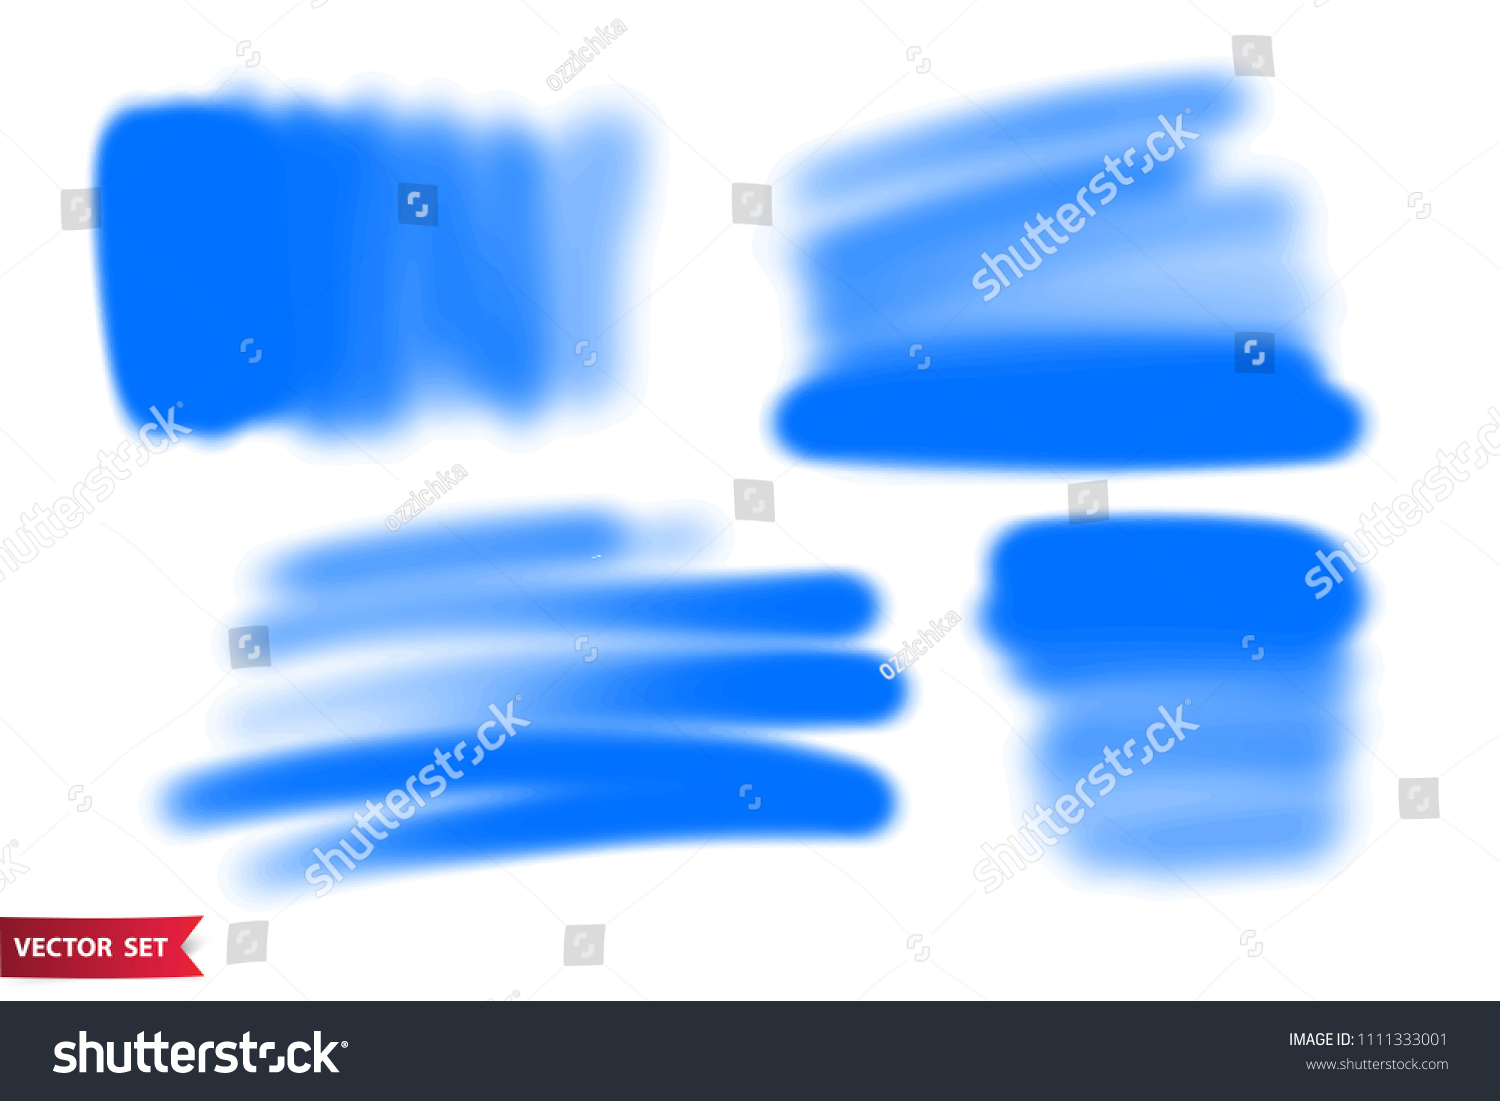 SVG of Vector set of hand drawn airbrush strokes. One color artistic hand drawn backgrounds. svg